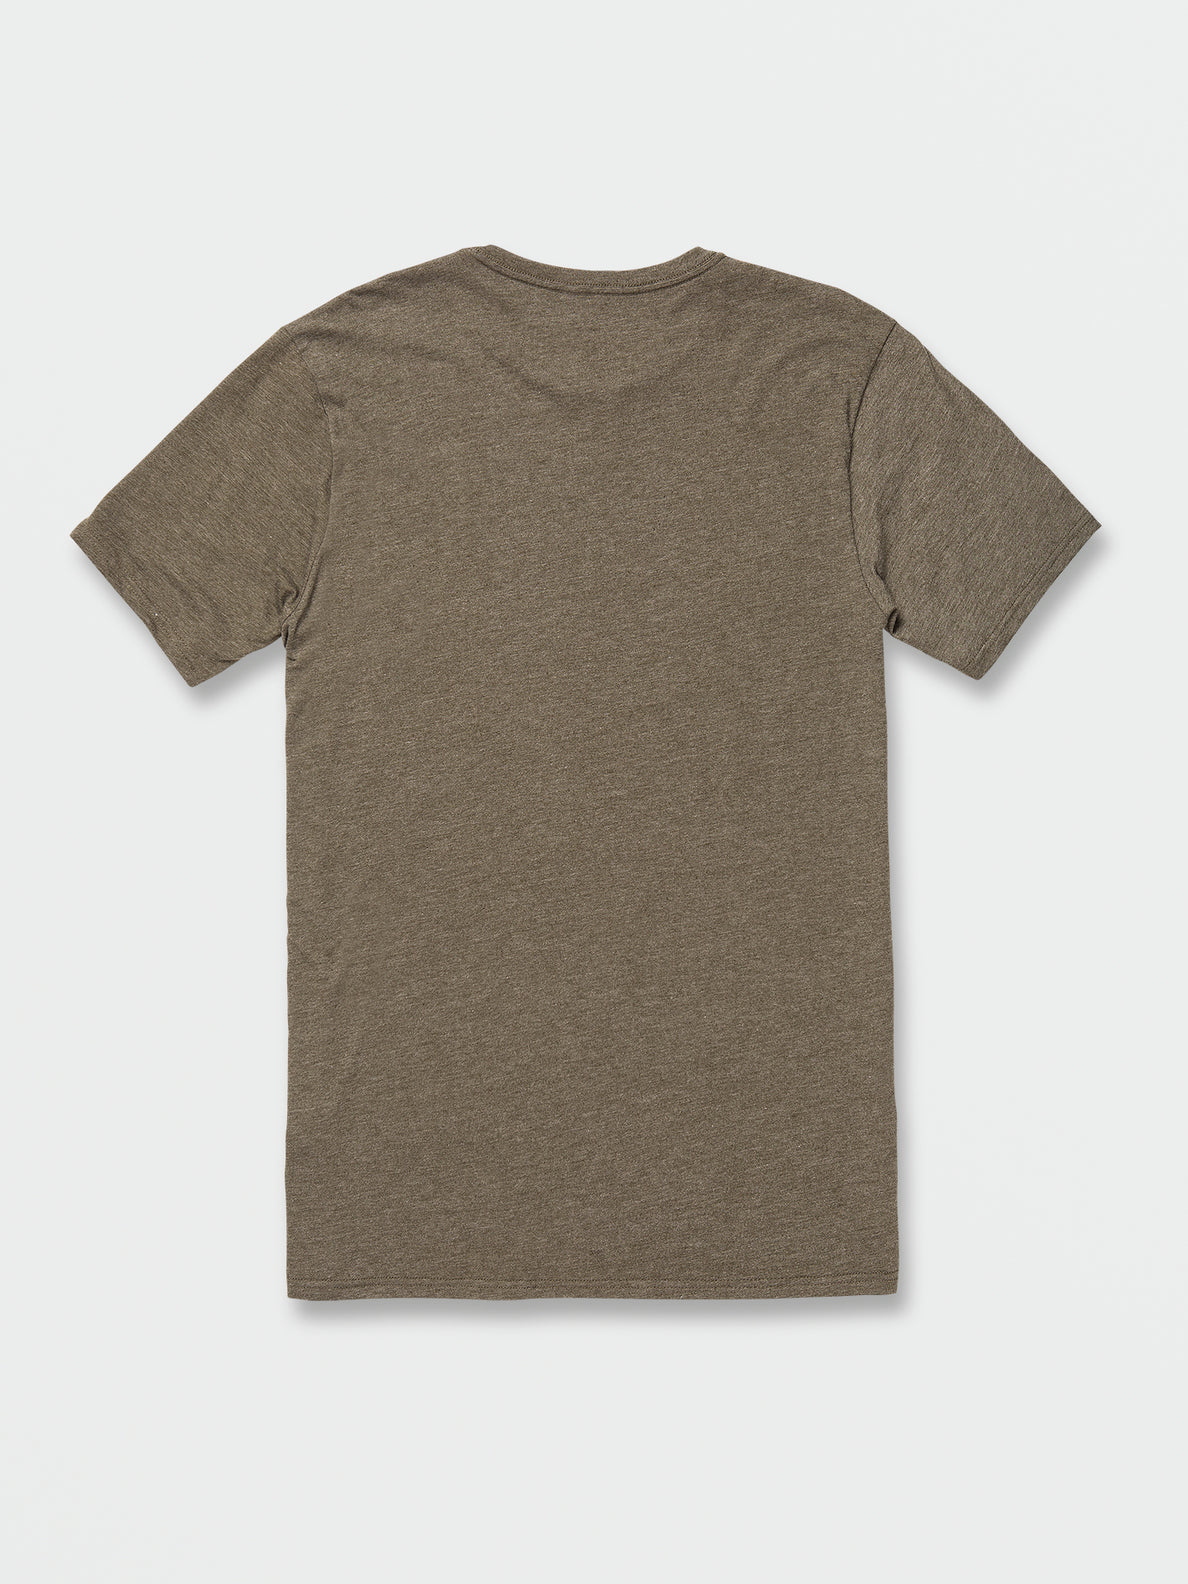 Divisionz Short Sleeve Tee - Martini Olive (A5742205_MTO) [B]